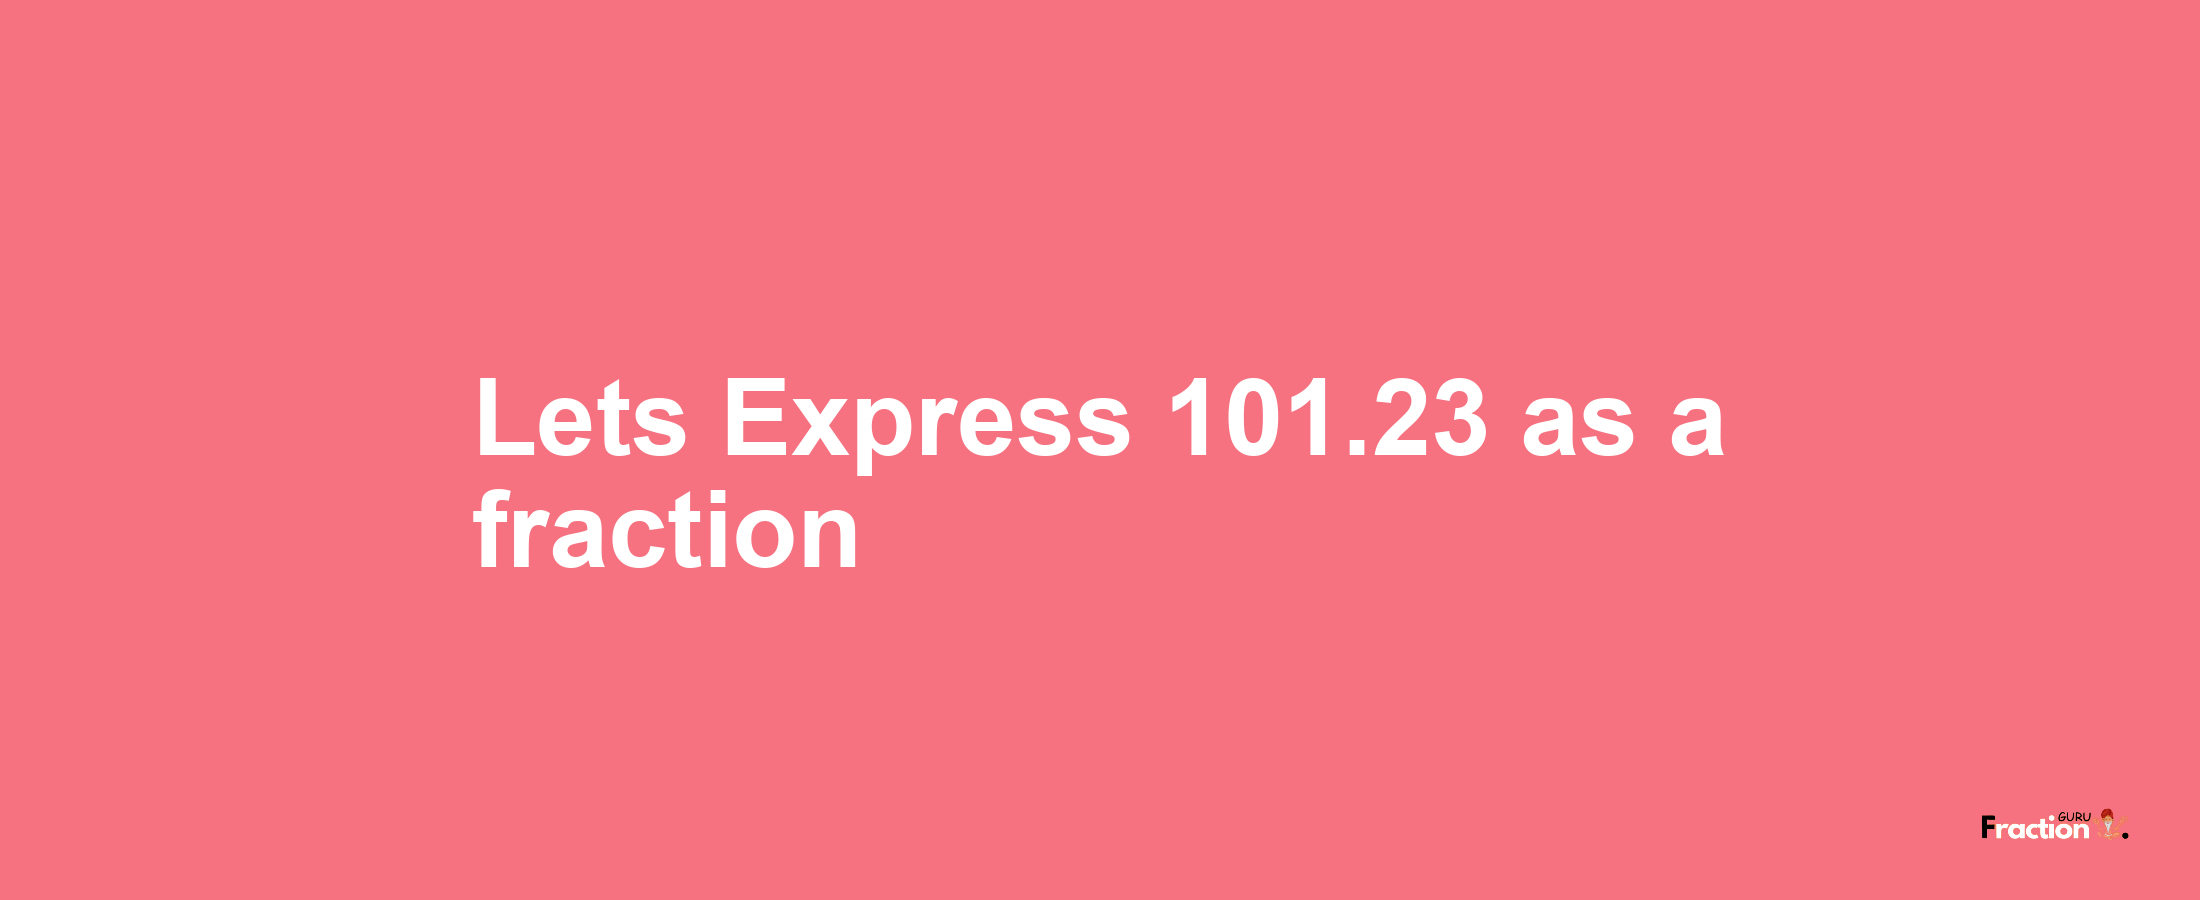 Lets Express 101.23 as afraction